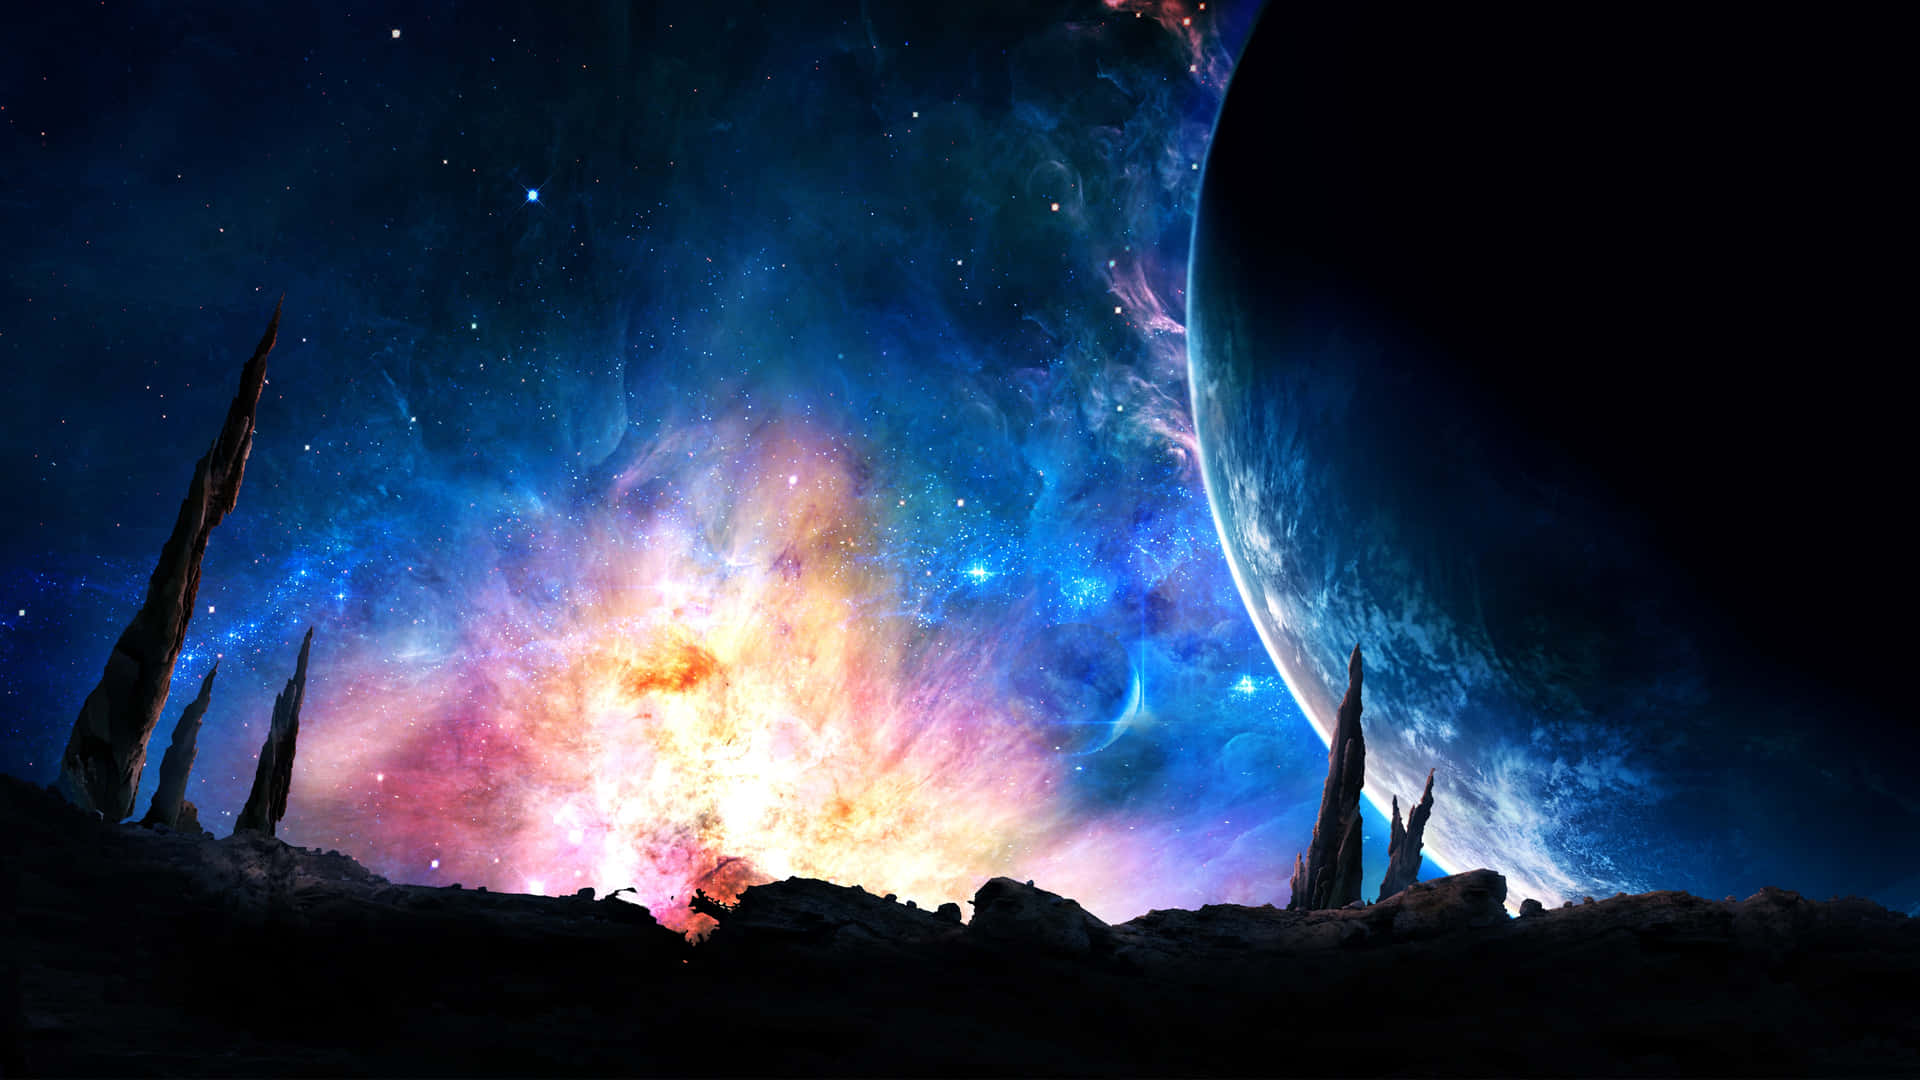 “Explore the Gratifying Beauty of Space with 4K Resolution.”